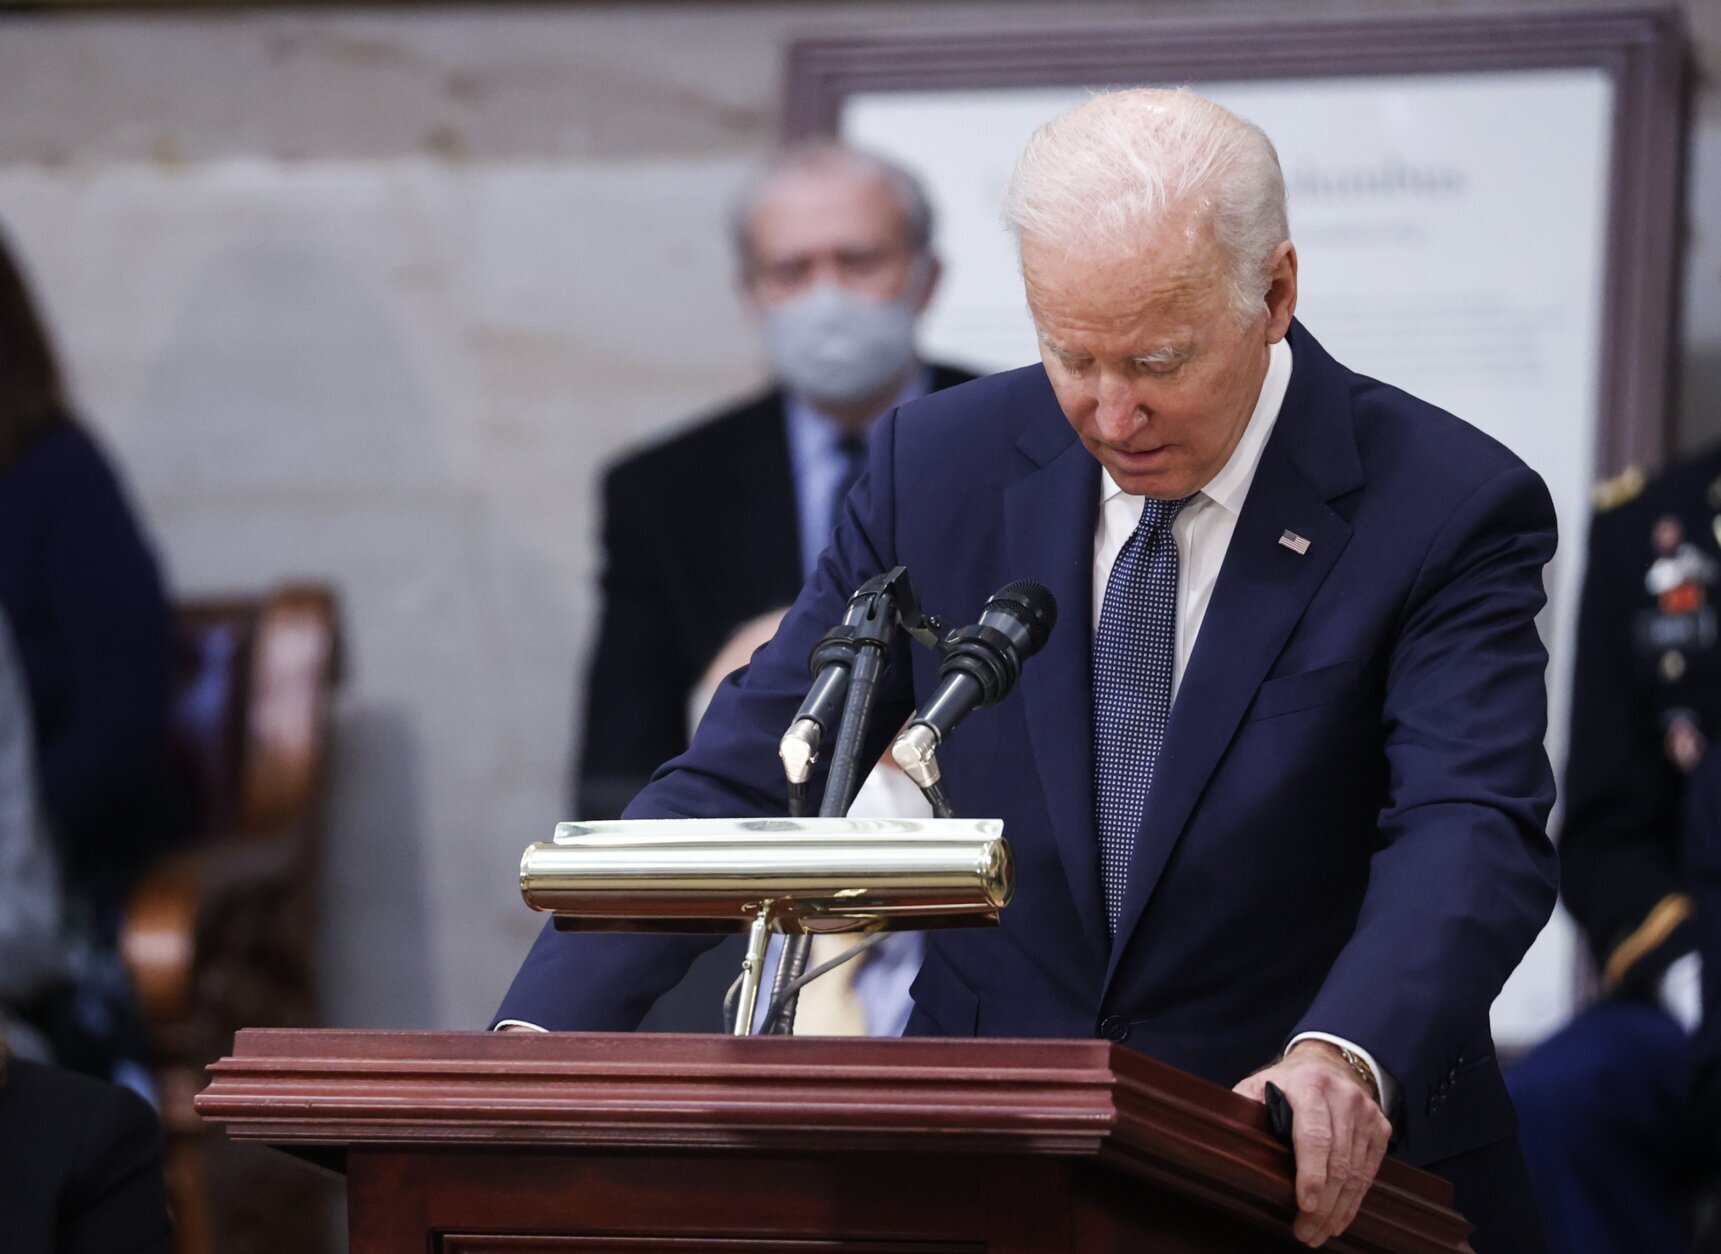 President Joe Biden speaks near the casket of former Sen. Bob Dole, who died on Sunday, during a congressional ceremony to honor Dole, who lies in state in the U.S. Capitol Rotunda in Washington, Thursday, Dec. 9, 2021. (Jonathan Ernst/Pool via AP)